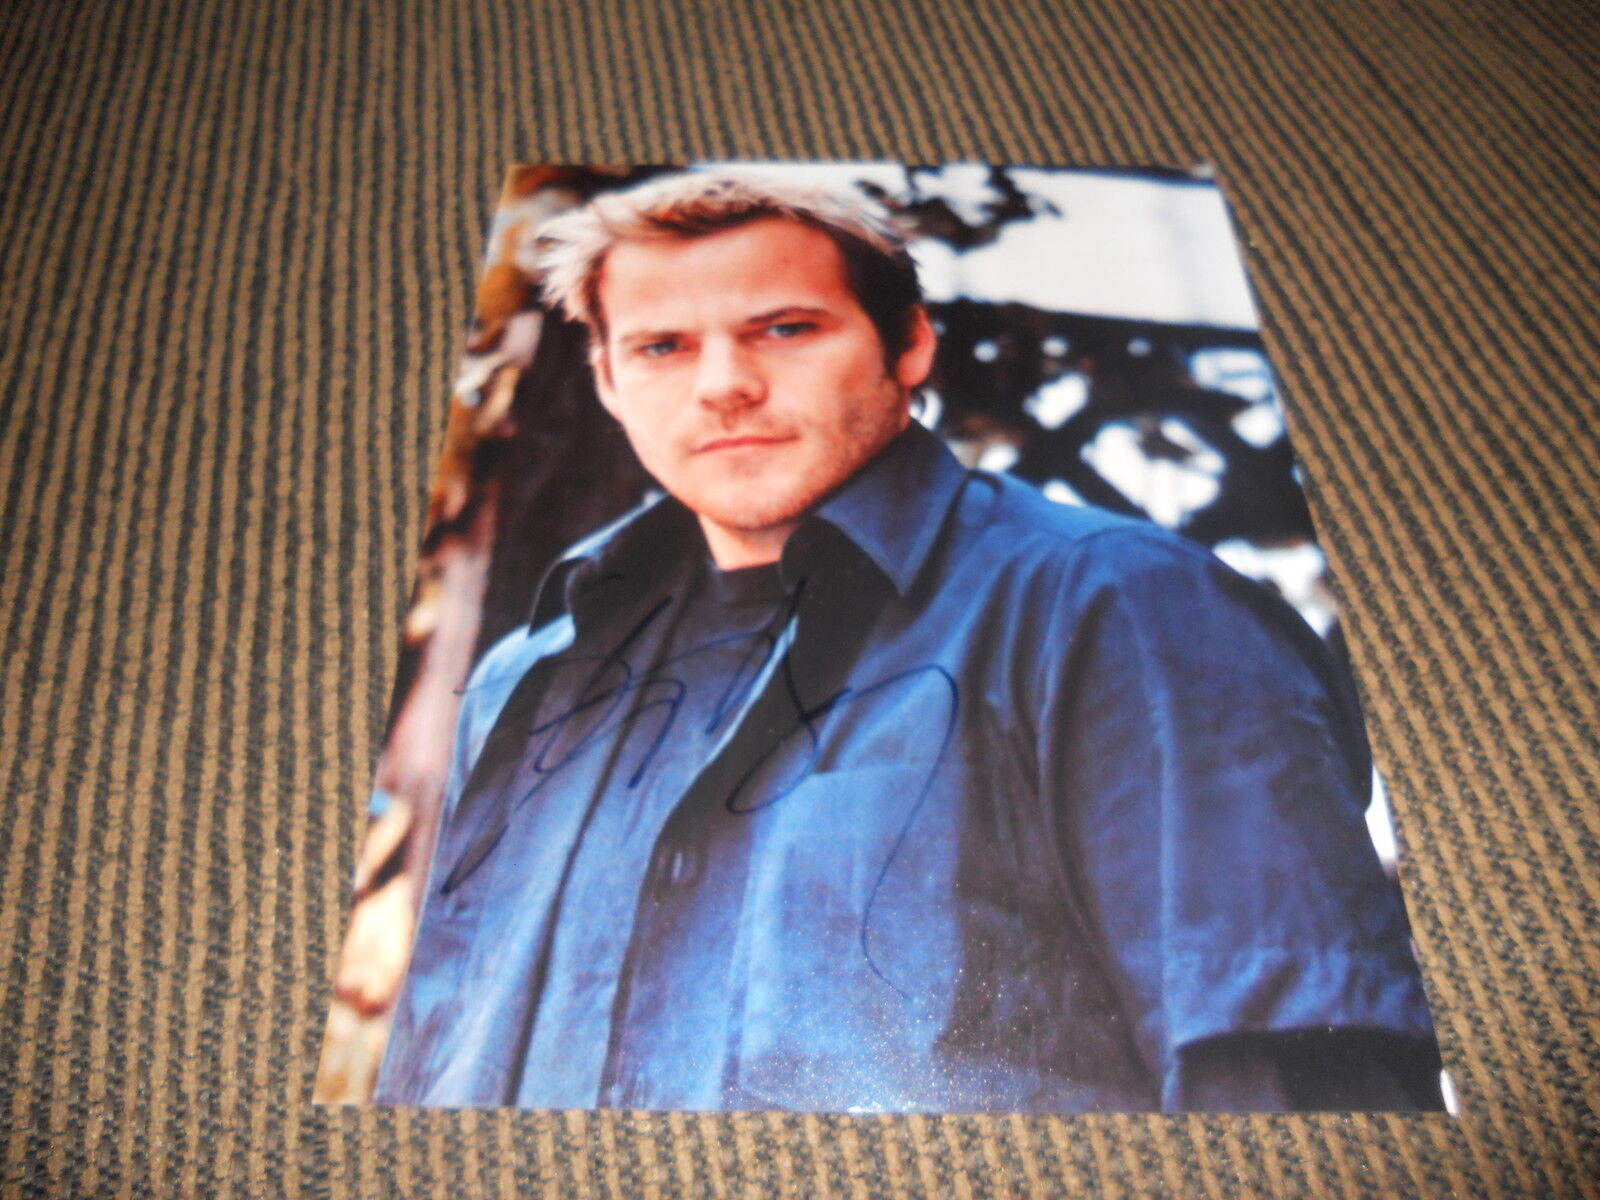 Stephen Dorff Sexy Signed Autograph 8x10 Photo Poster painting PSA Guaranteed